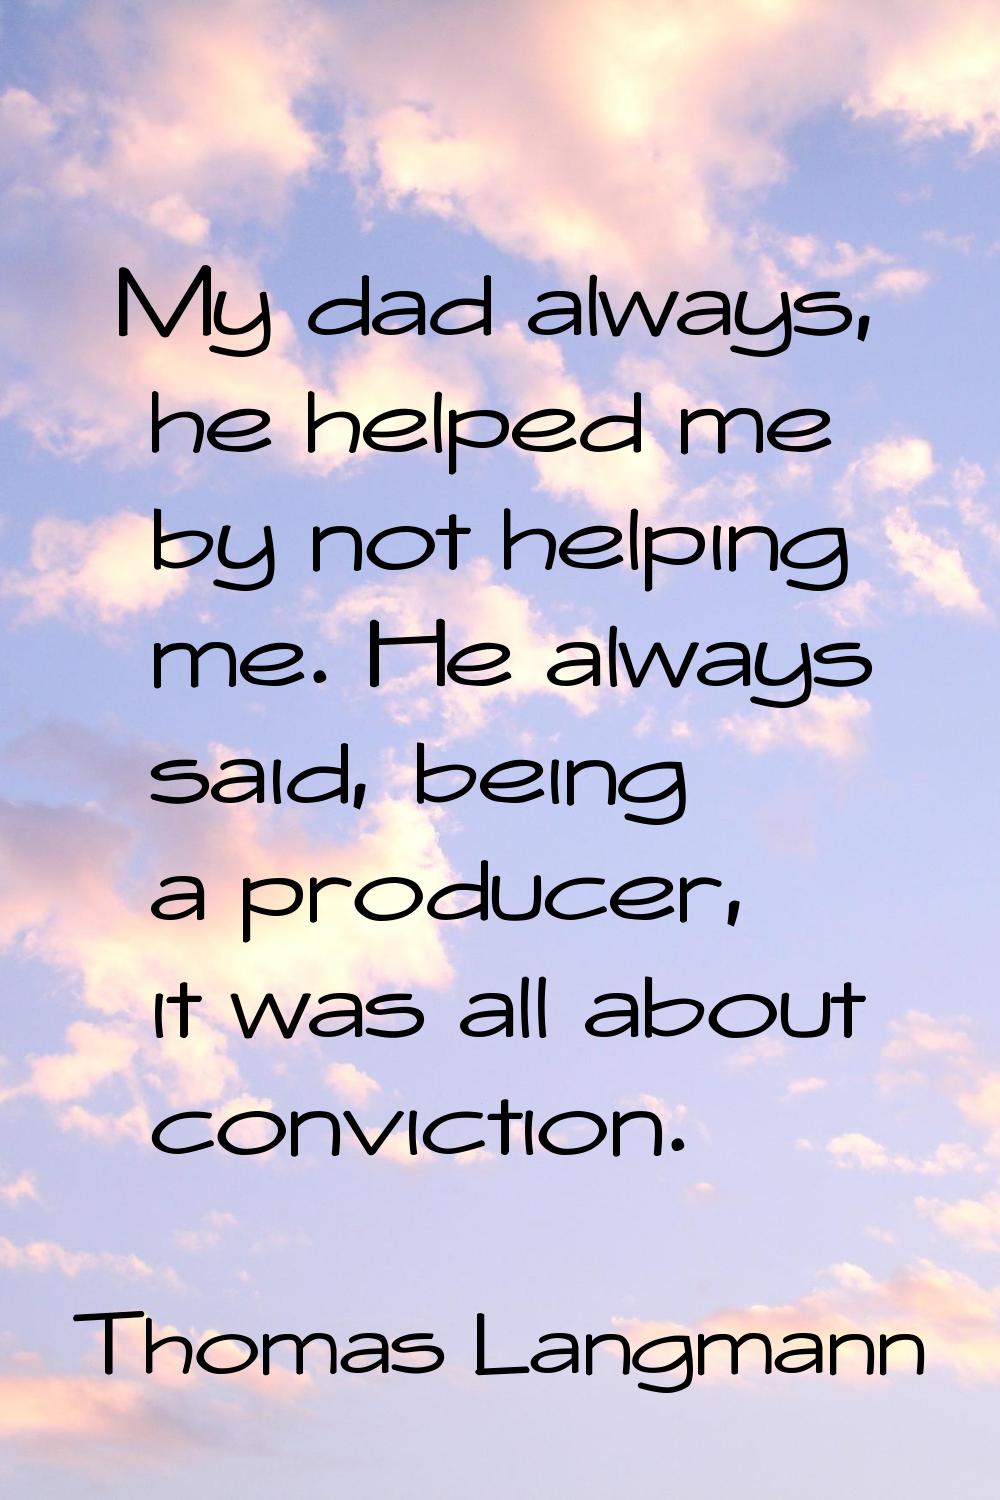 My dad always, he helped me by not helping me. He always said, being a producer, it was all about c